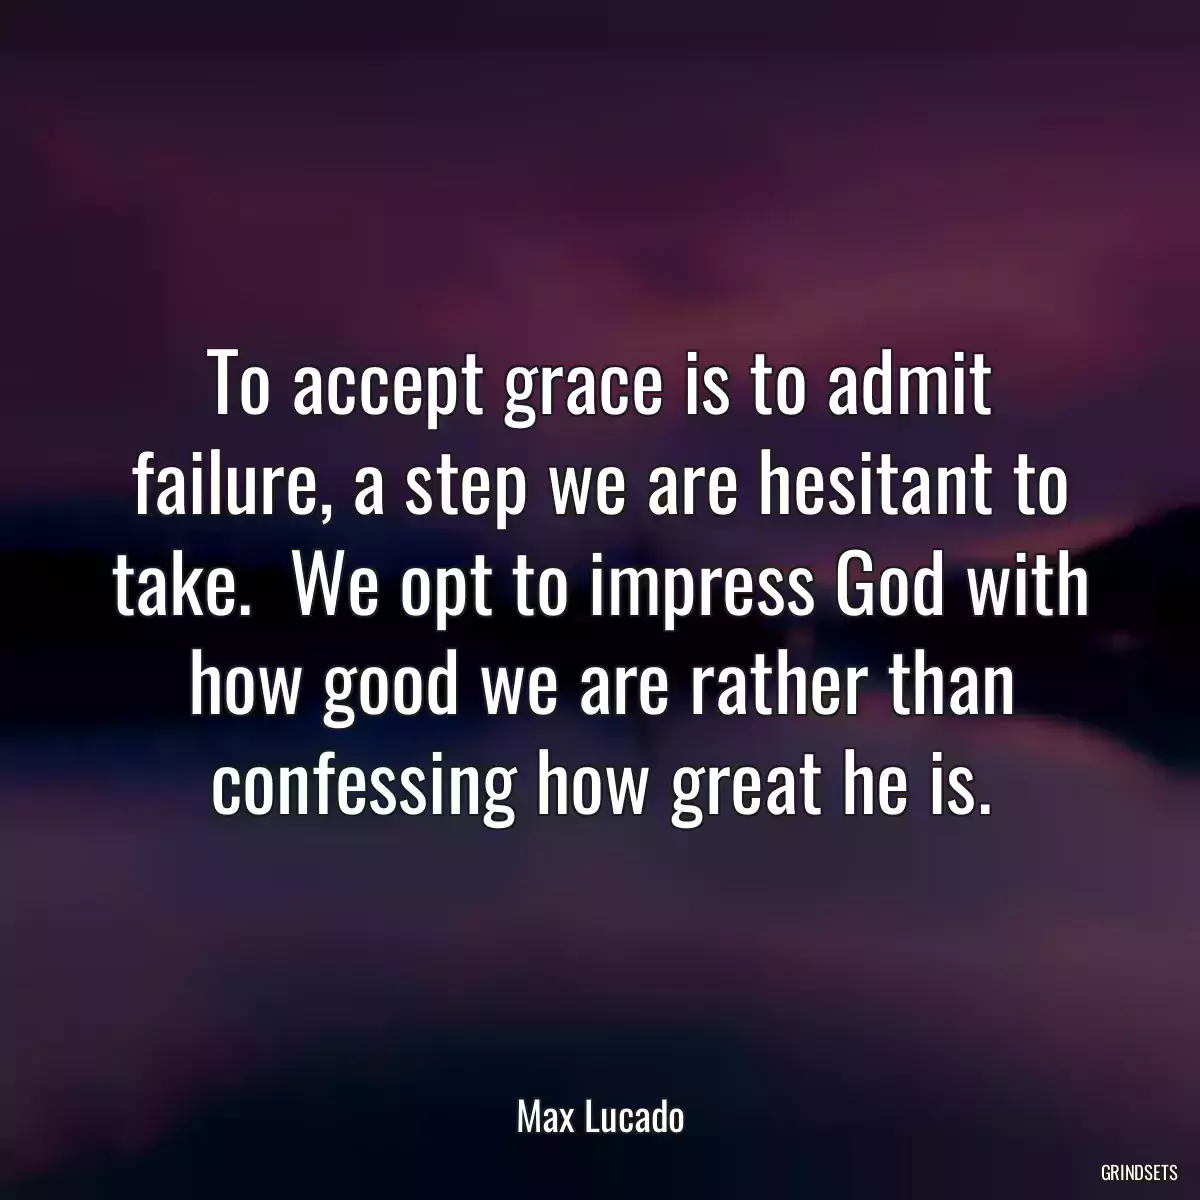 To accept grace is to admit failure, a step we are hesitant to take.  We opt to impress God with how good we are rather than confessing how great he is.